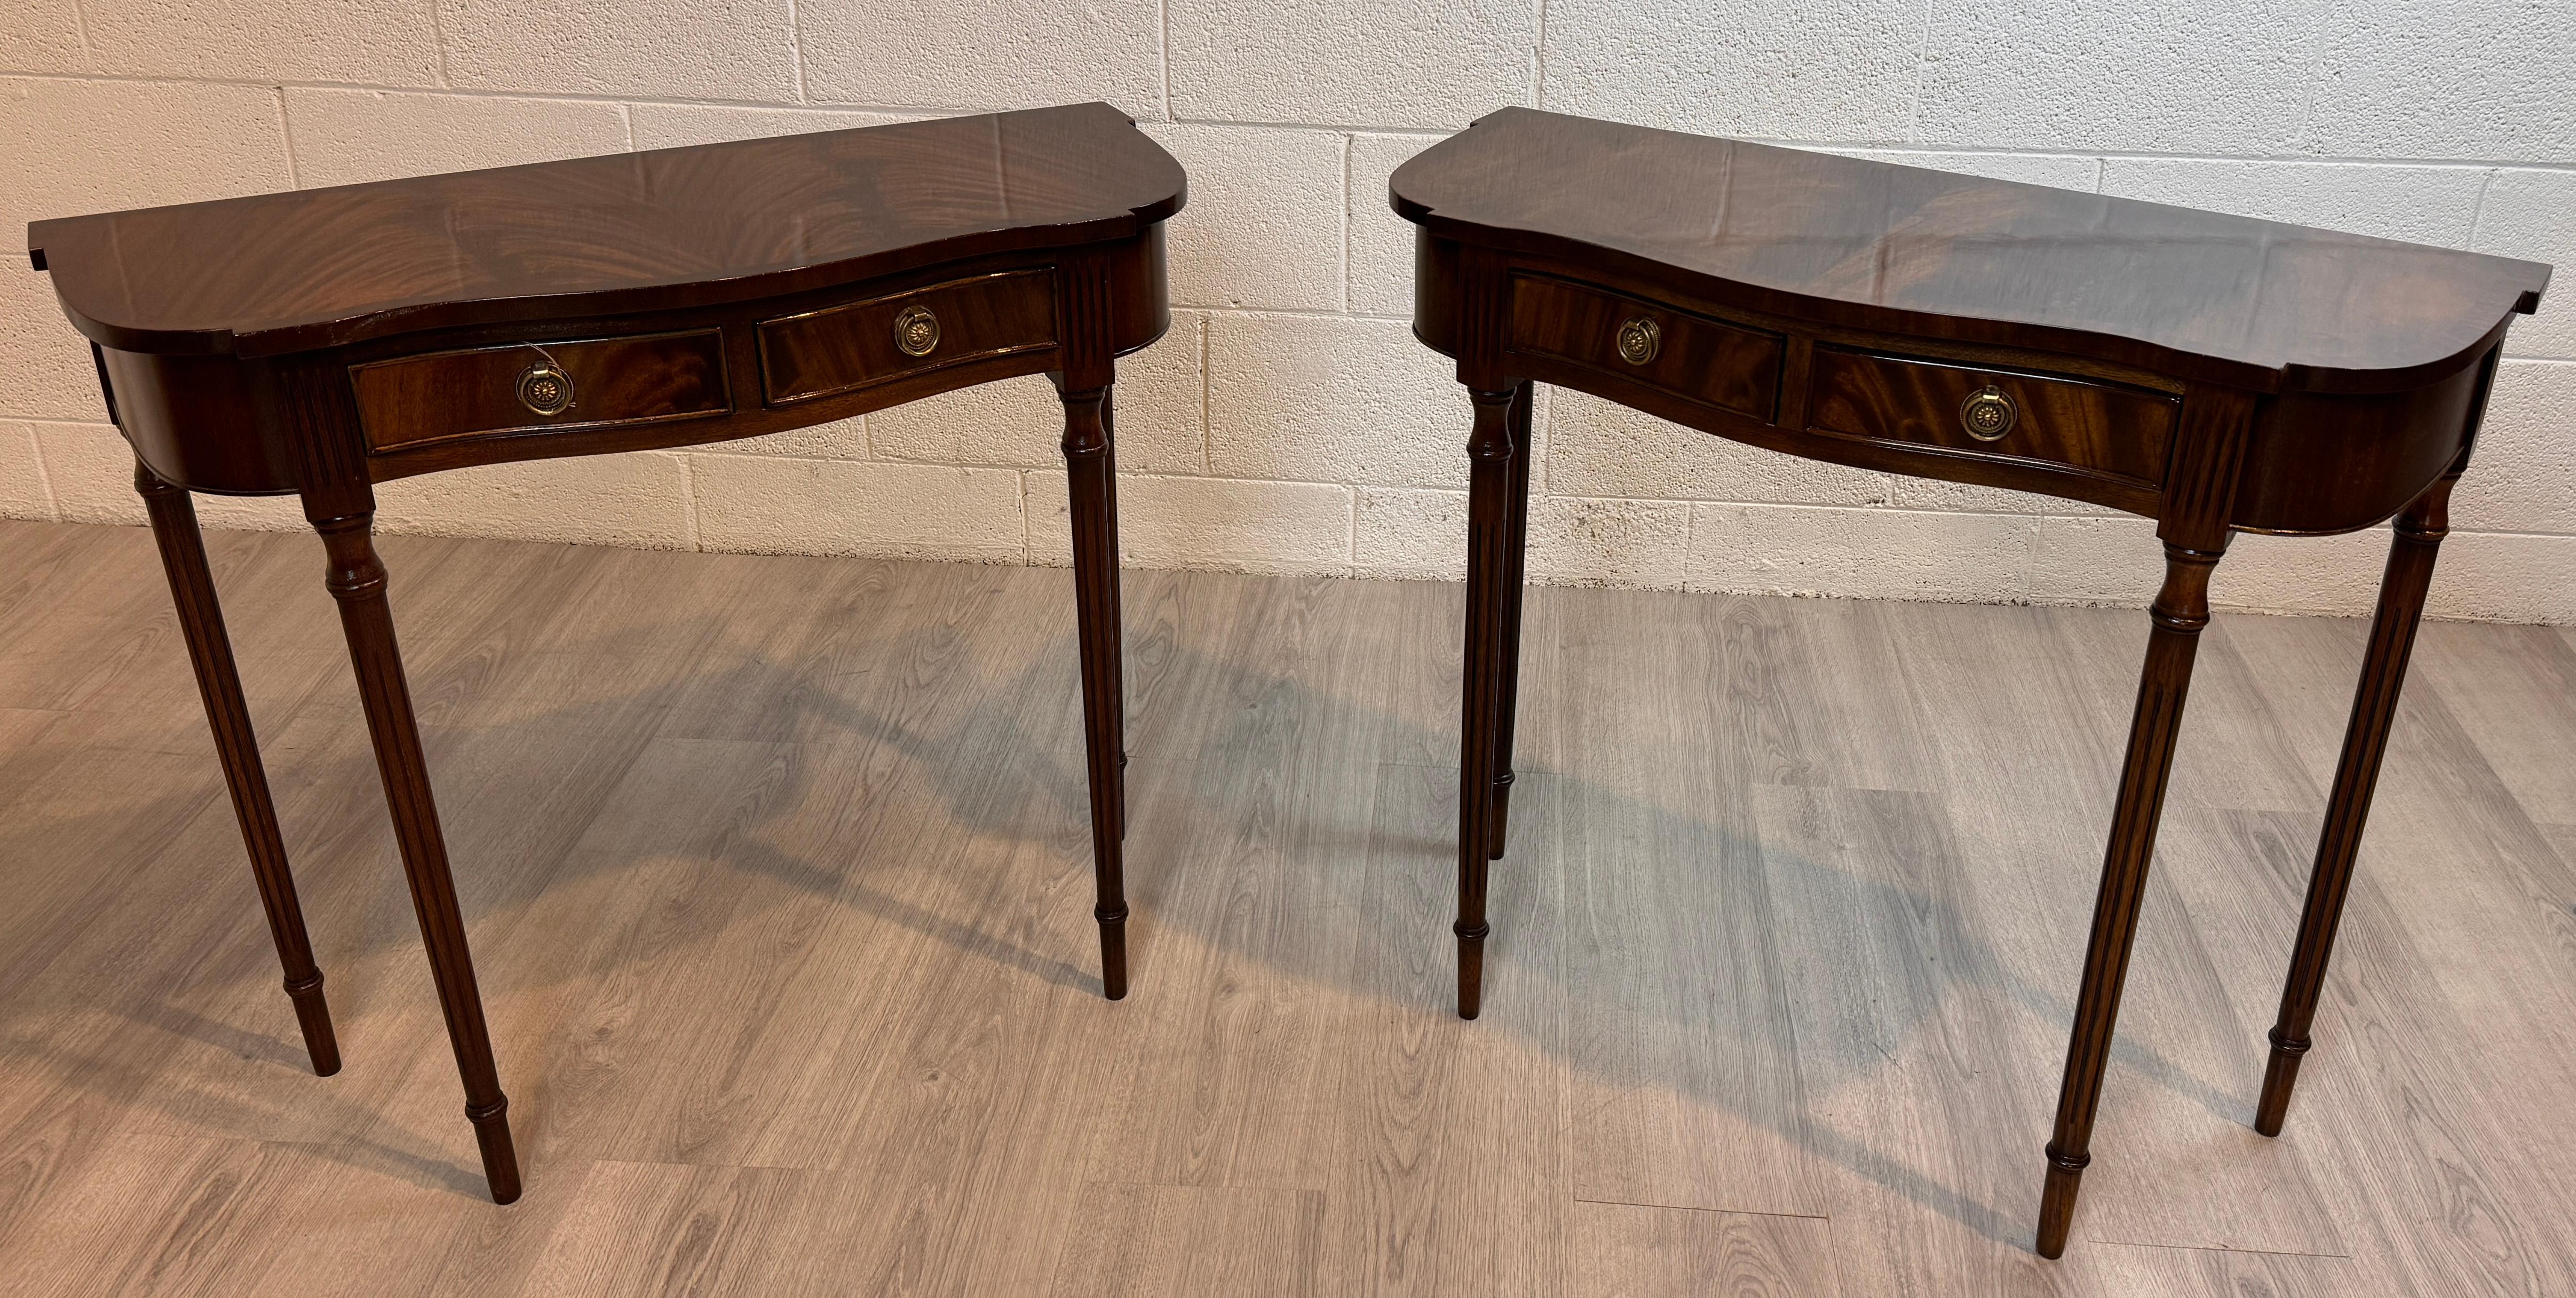 18th Century Style Vintage English Console Table with Two Drawers For Sale 8